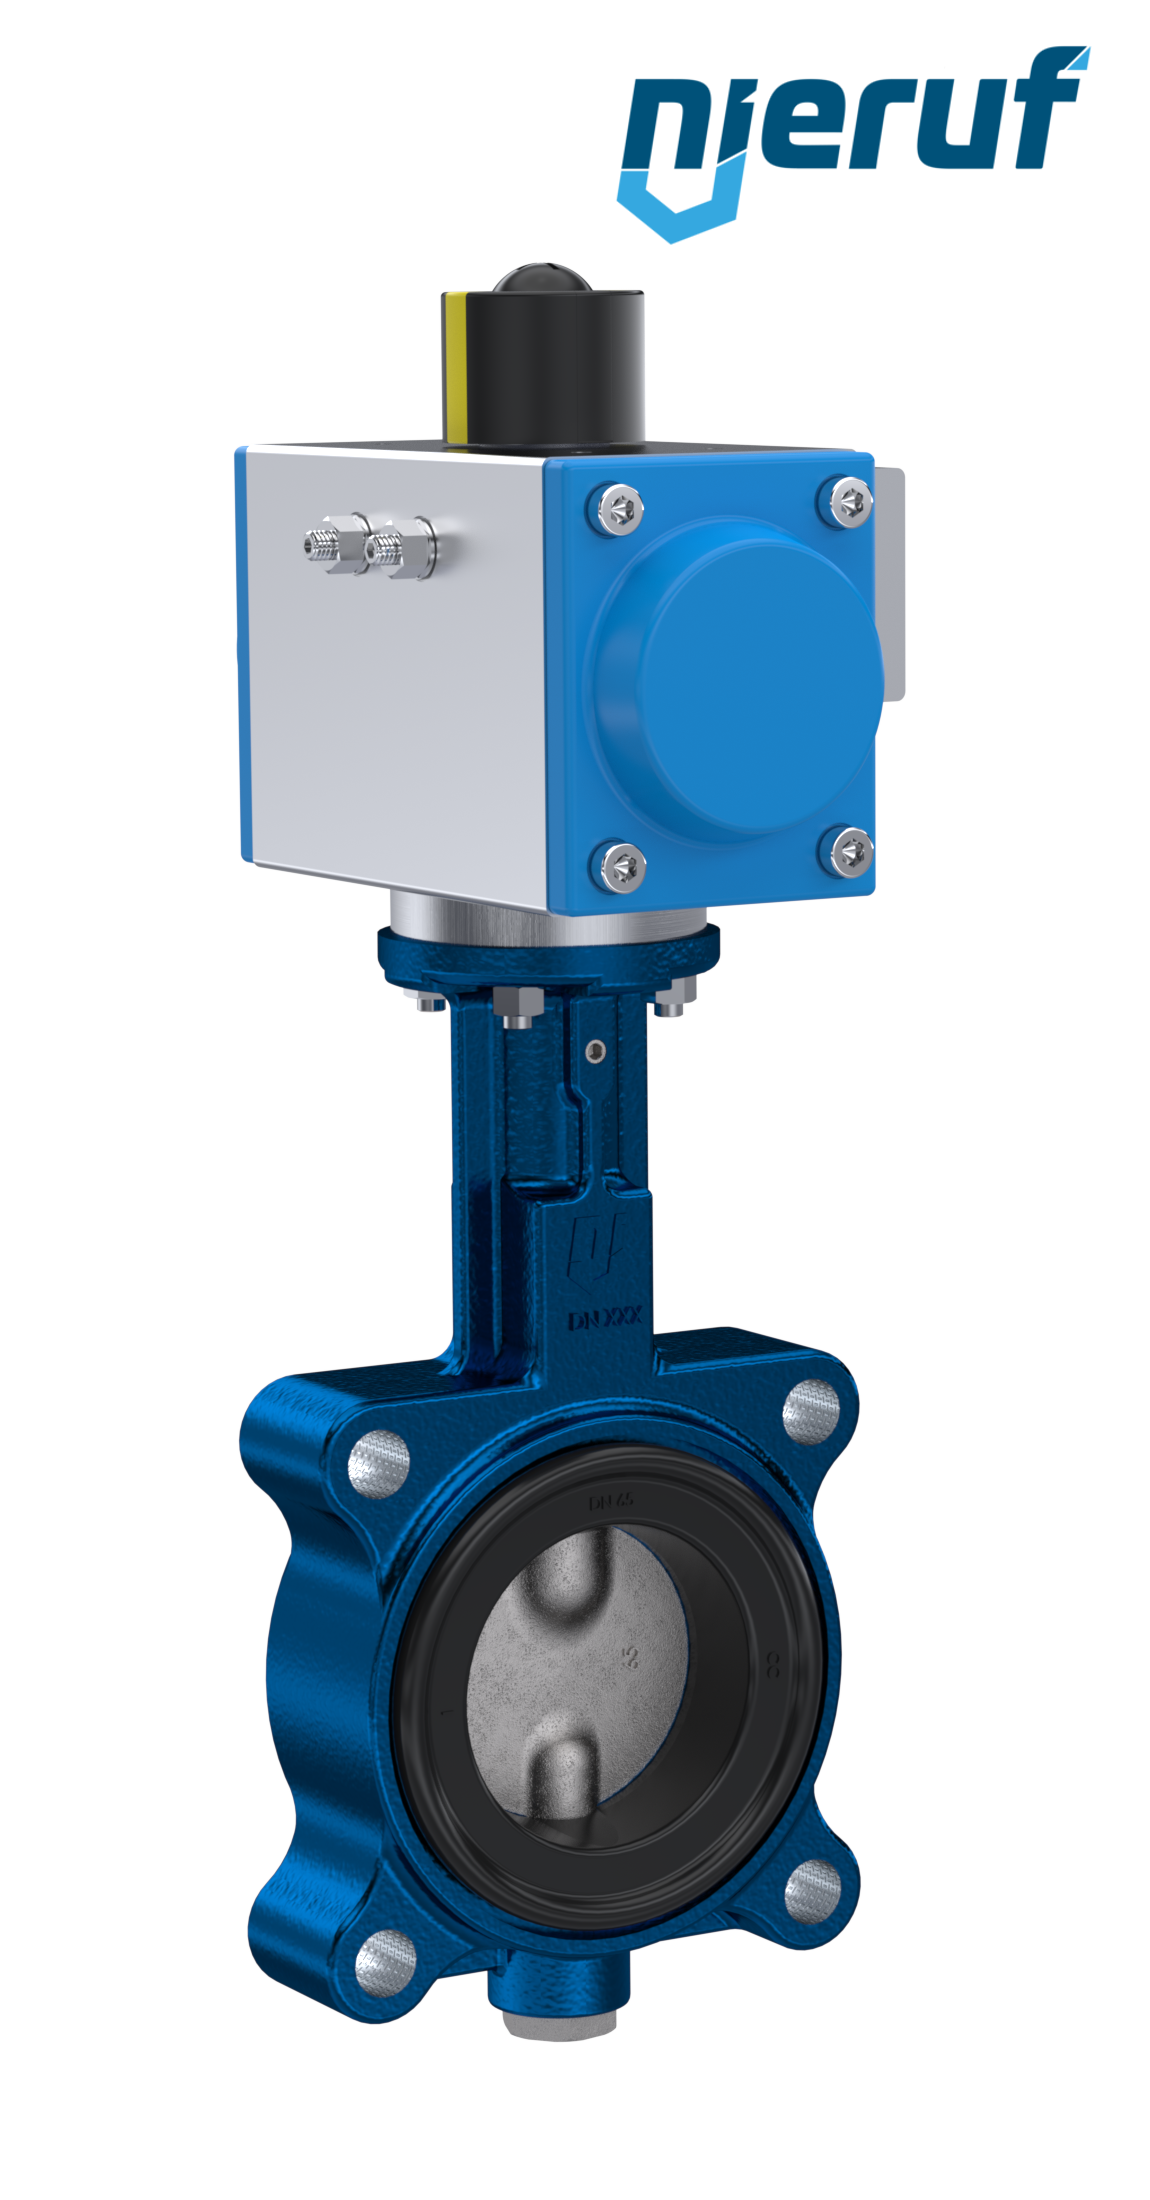 Butterfly valve DN 32 AK02 EPDM DVGW drinking water, WRAS, ACS, W270 pneumatic actuator double acting